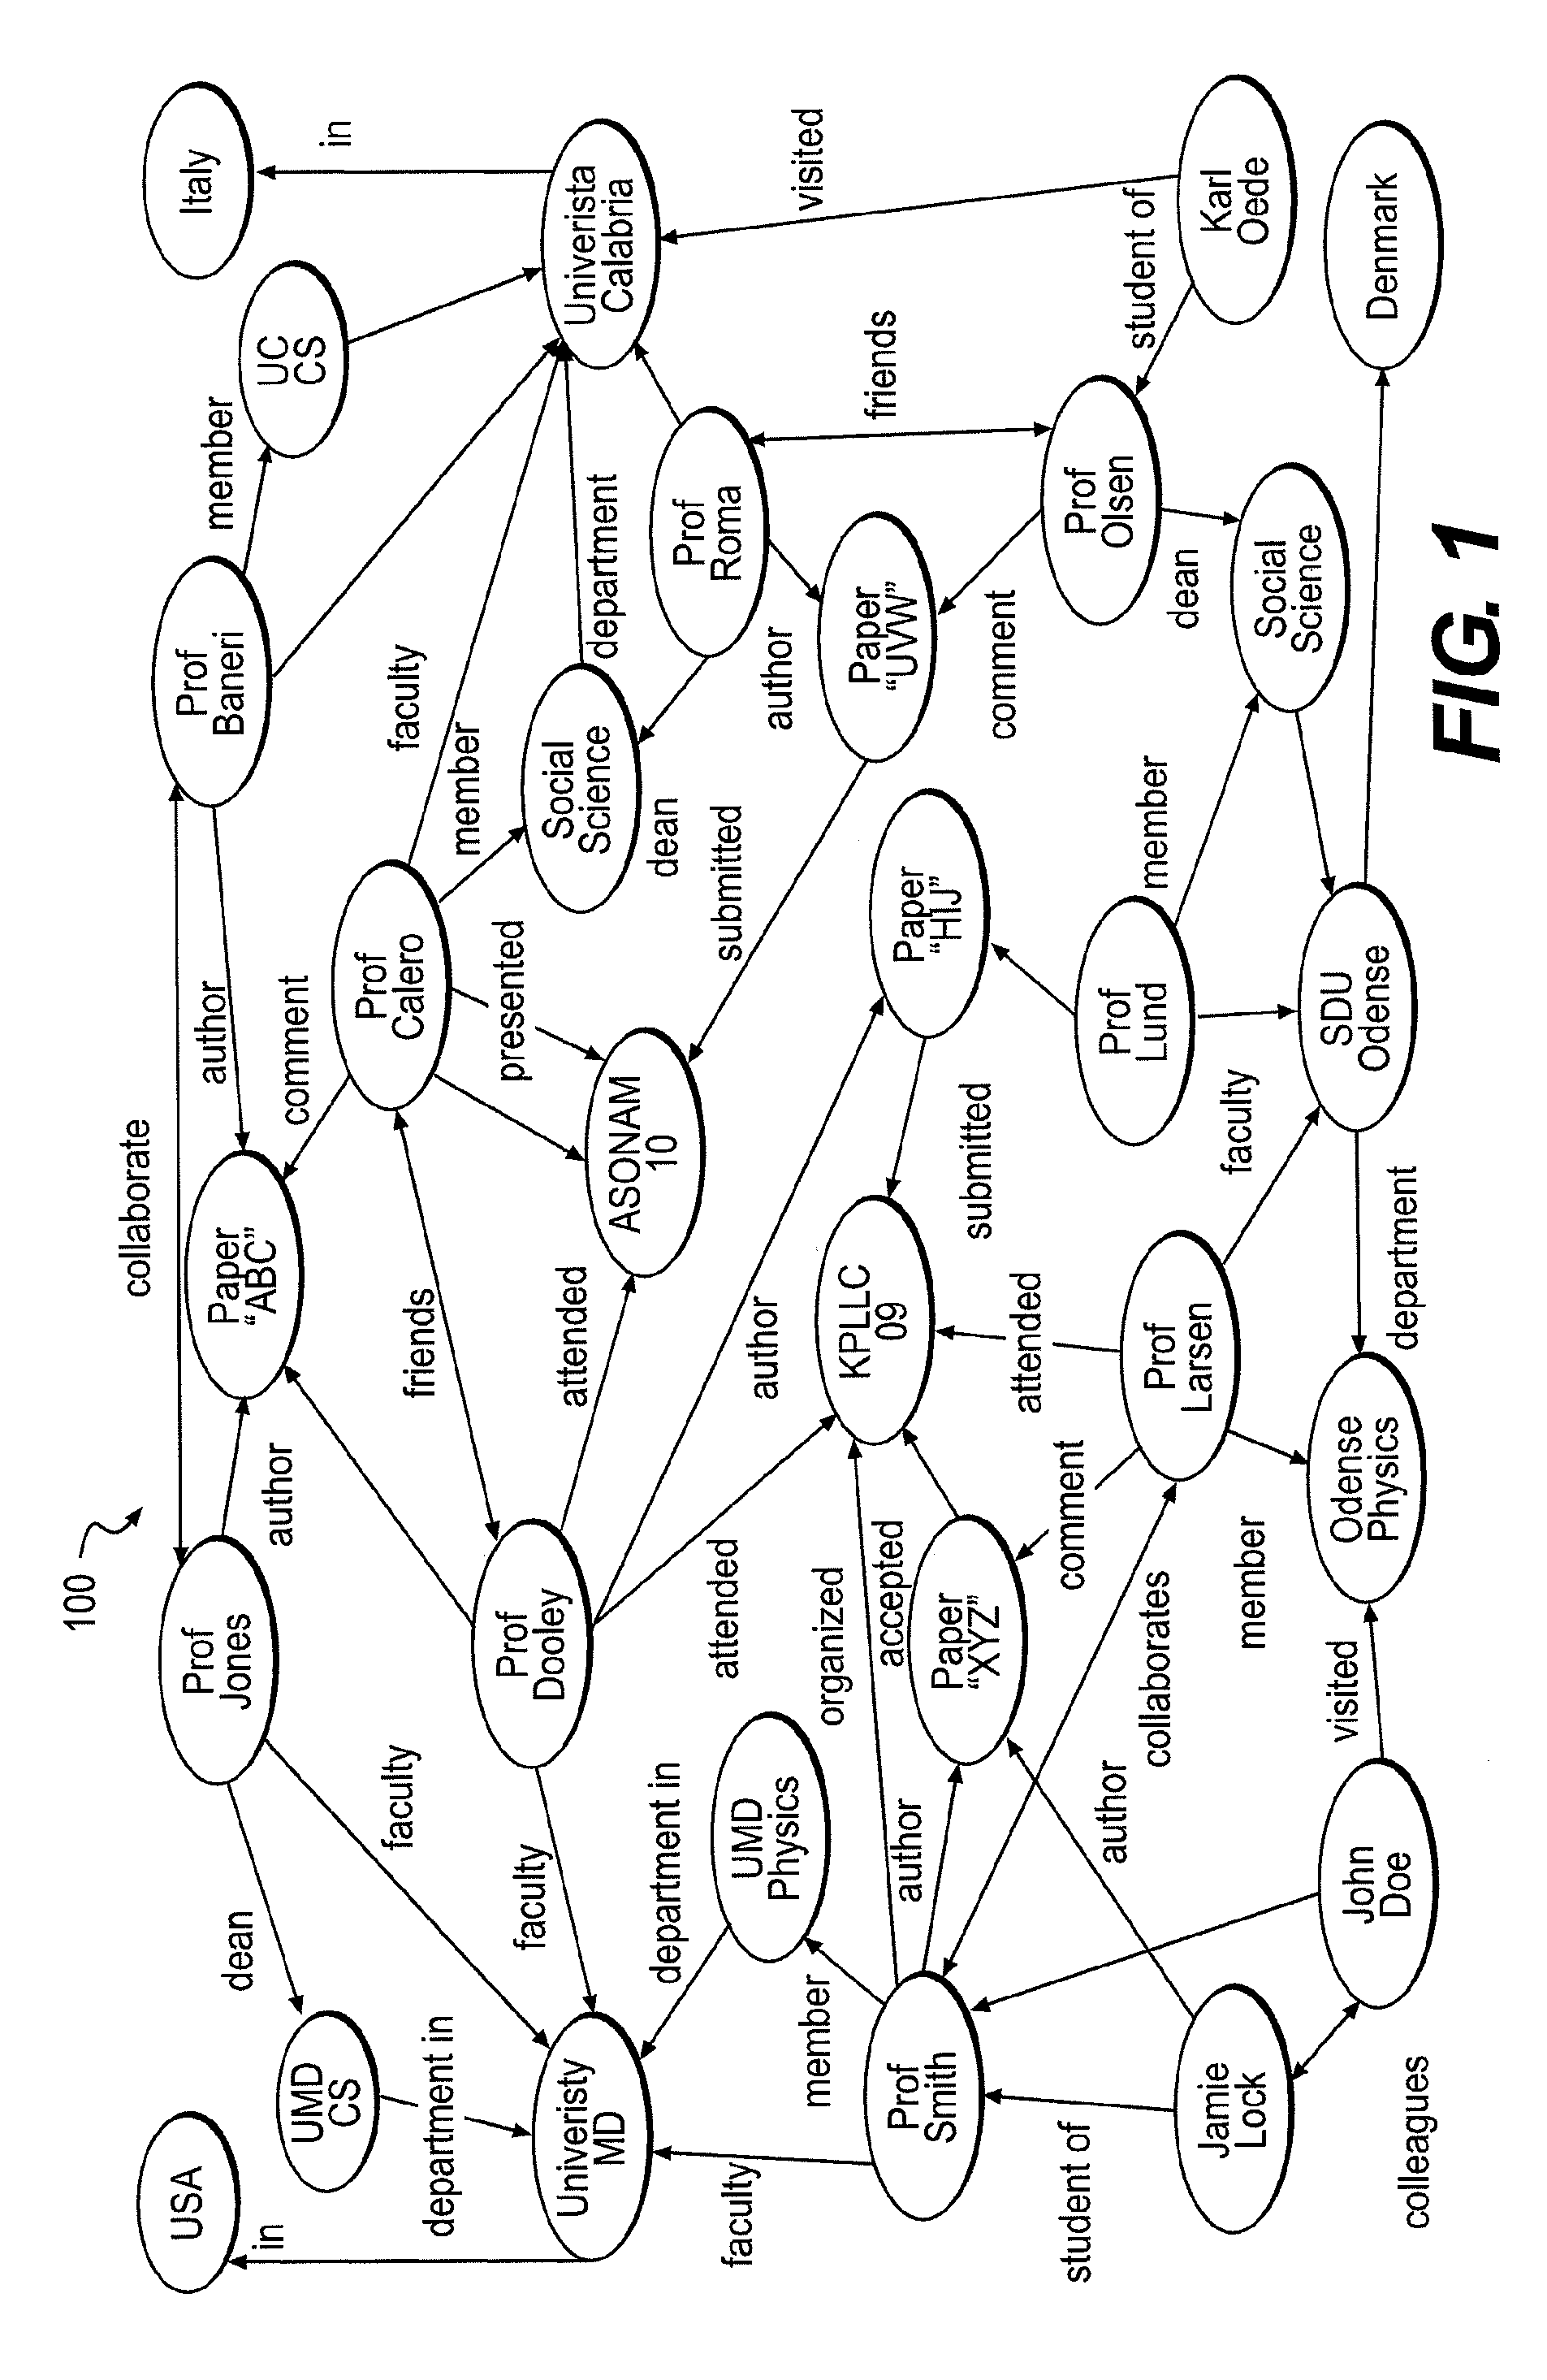 Systmen and method for data management in large data networks